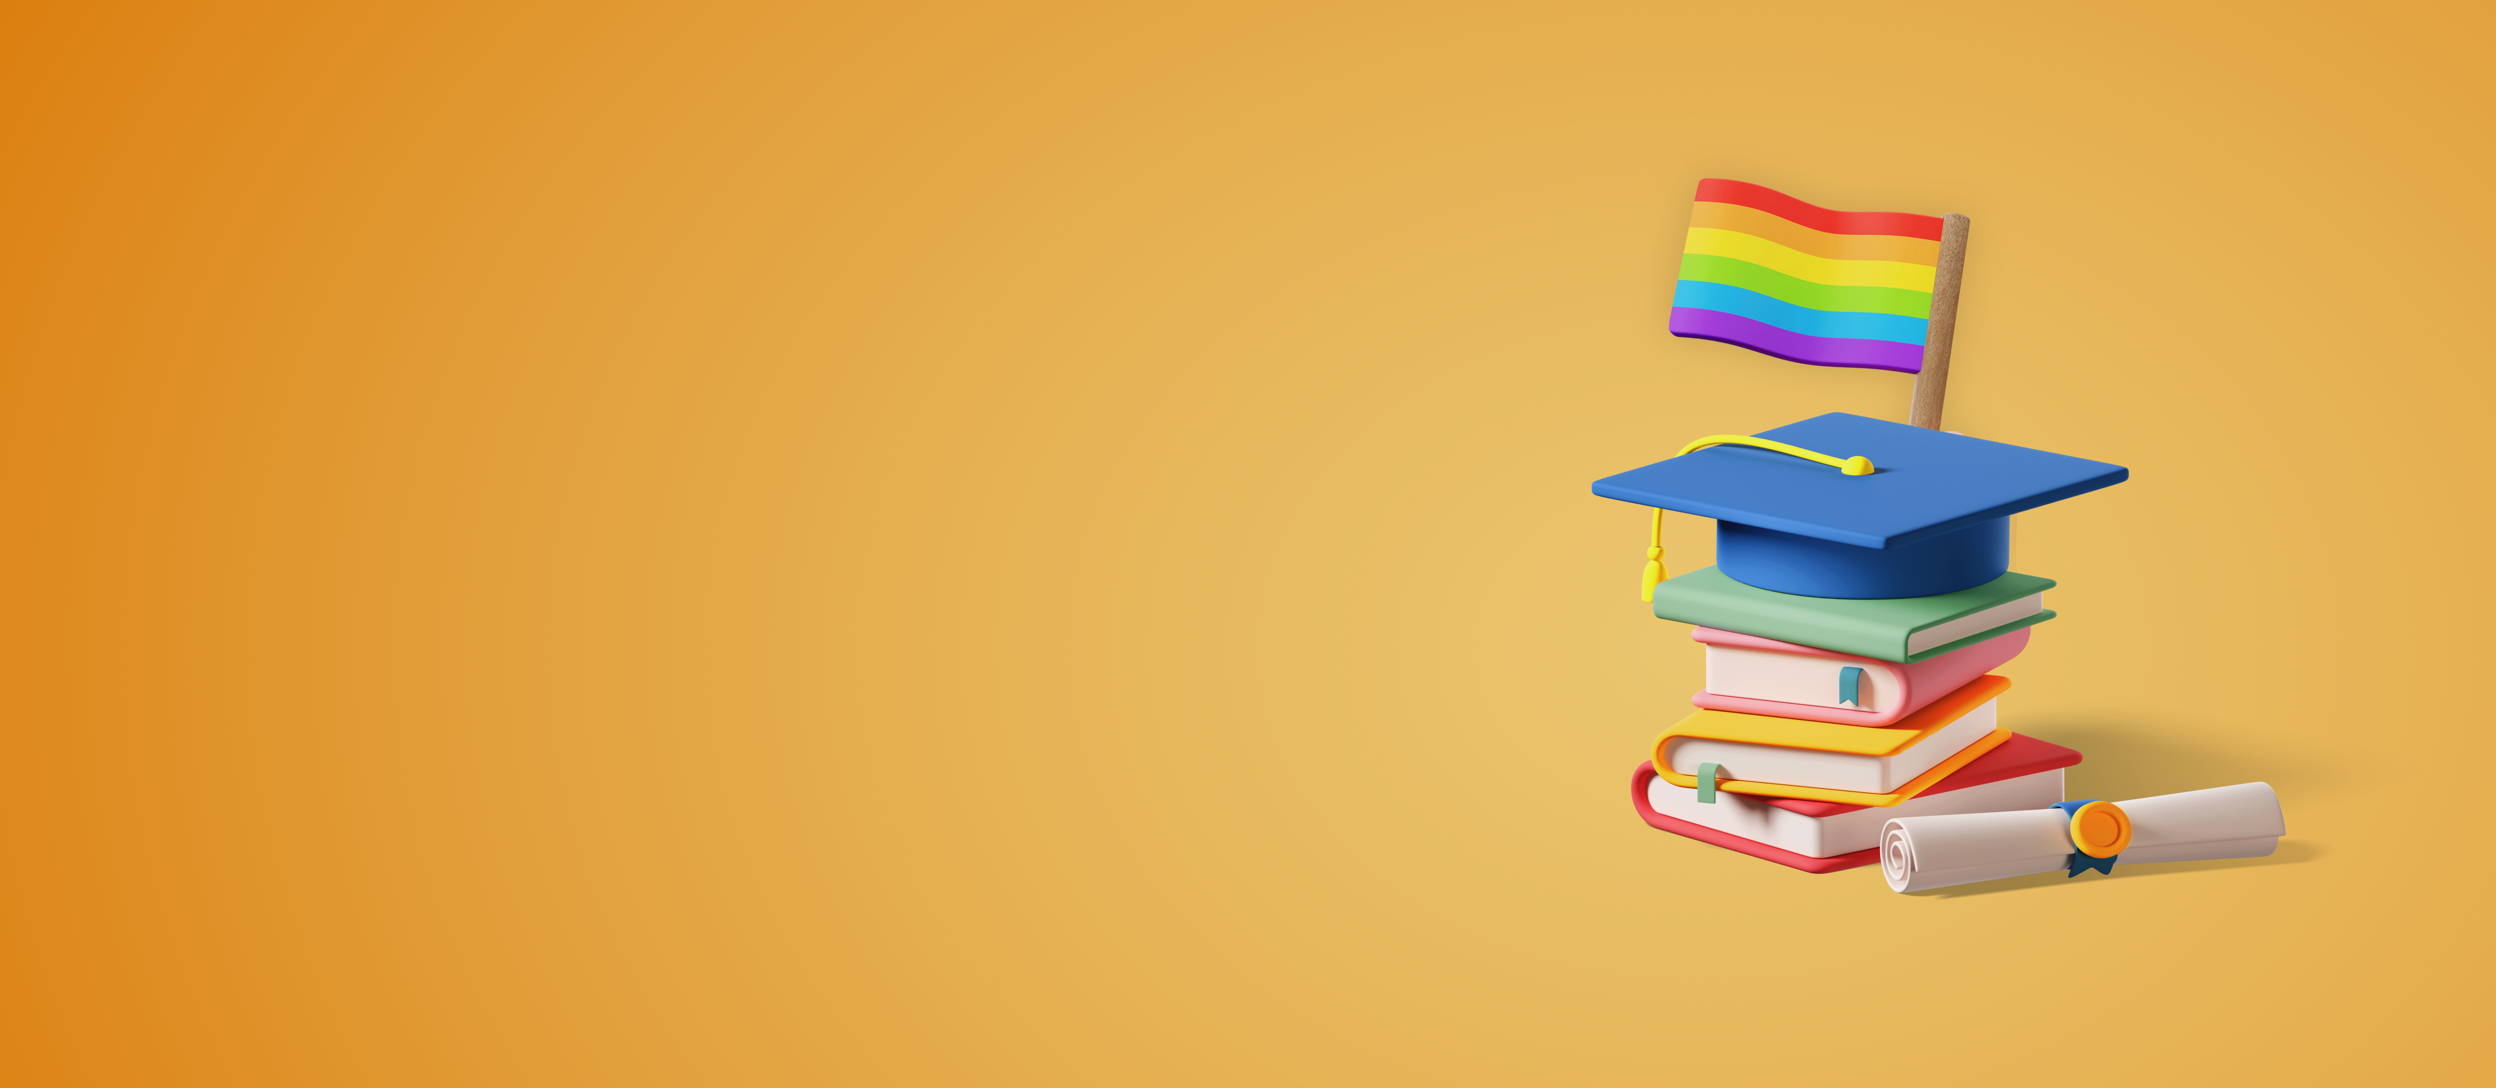 A rainbow flag, graduation cap, and stack of colorful textbooks (large)